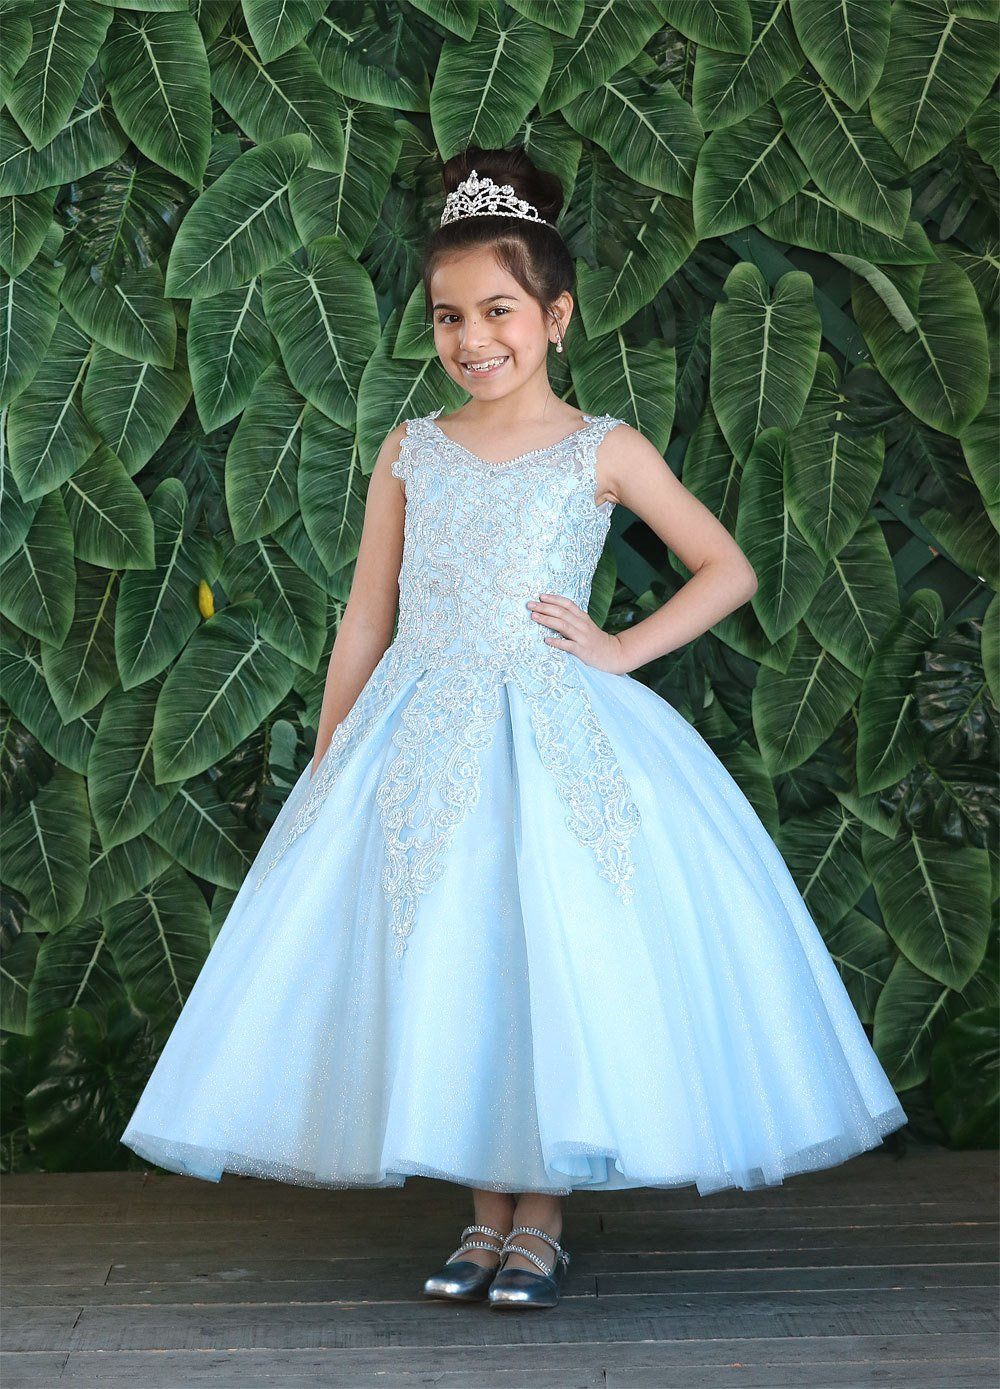 Girls Long Lace Applique Dress with Glitter Skirt by Calla KY221-Girls Formal Dresses-ABC Fashion